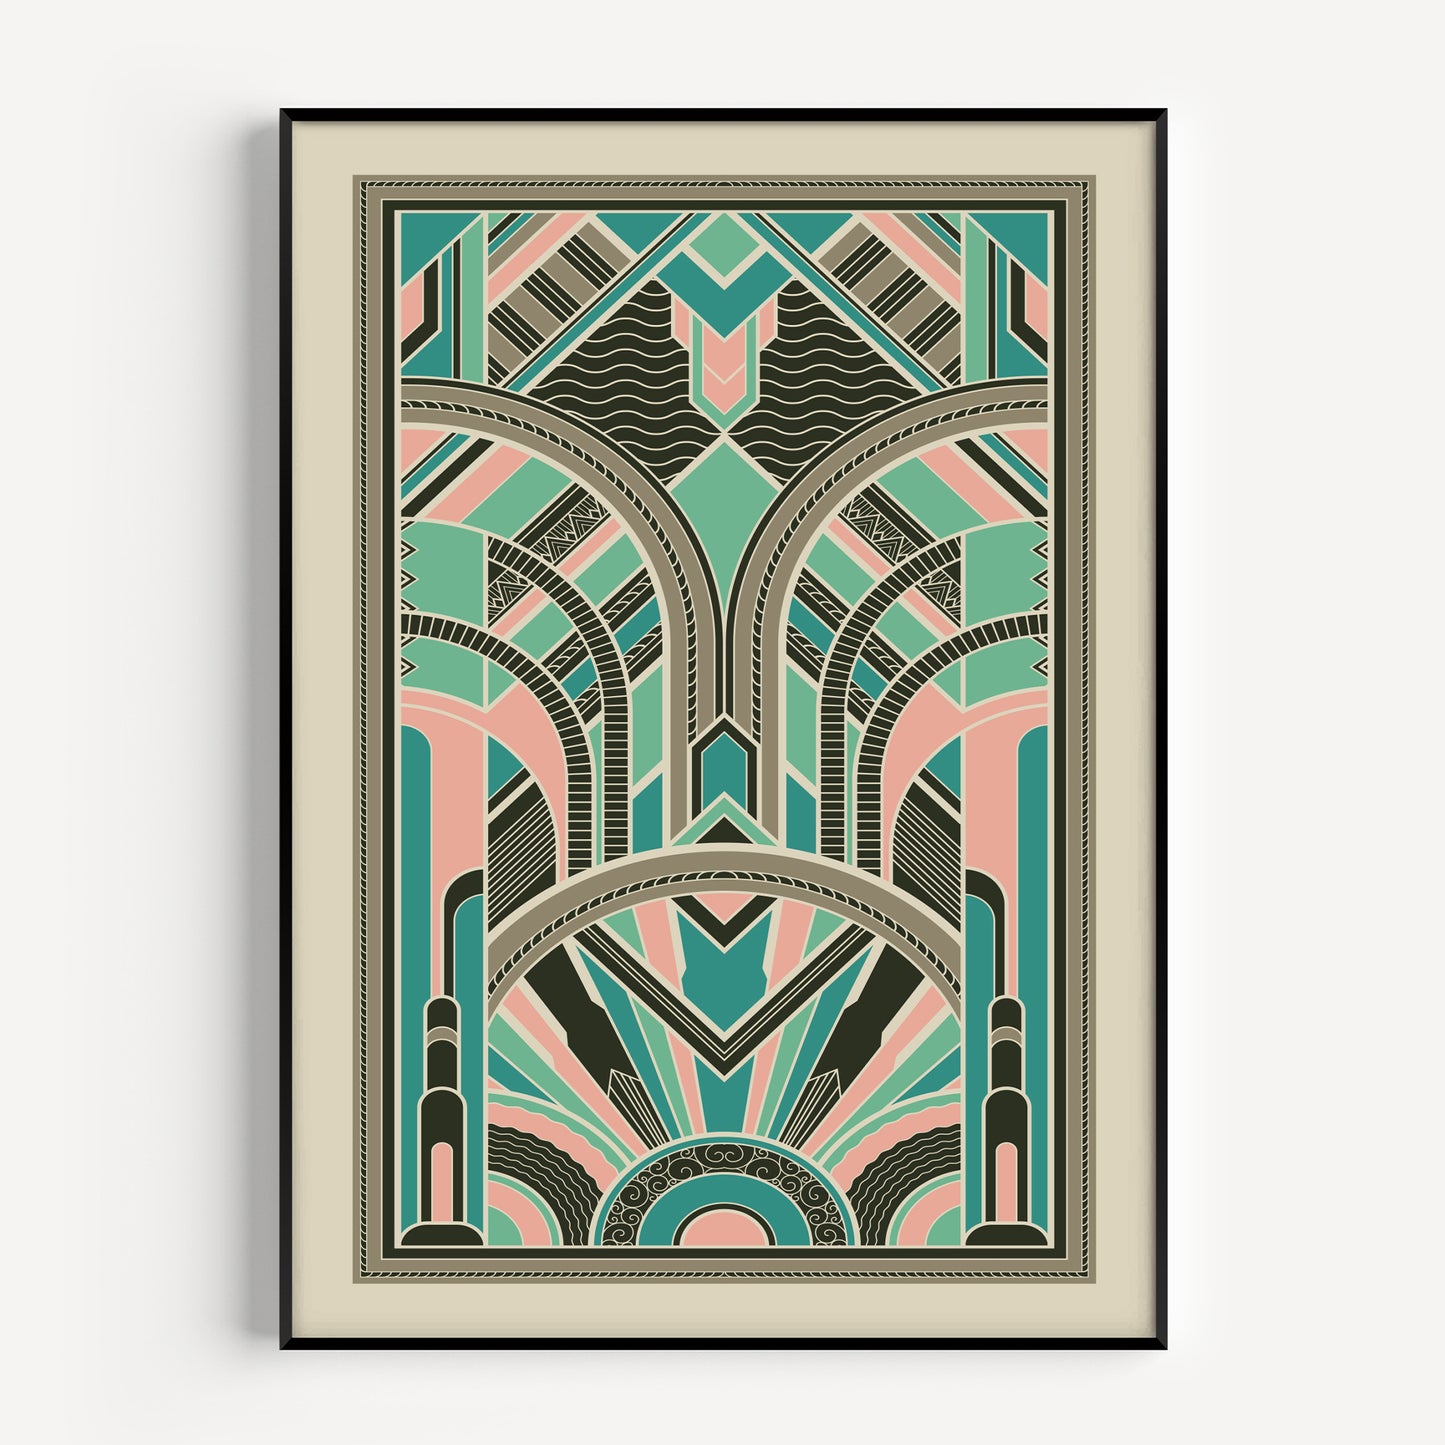 Art deco print with geometric pattern in pink and teal